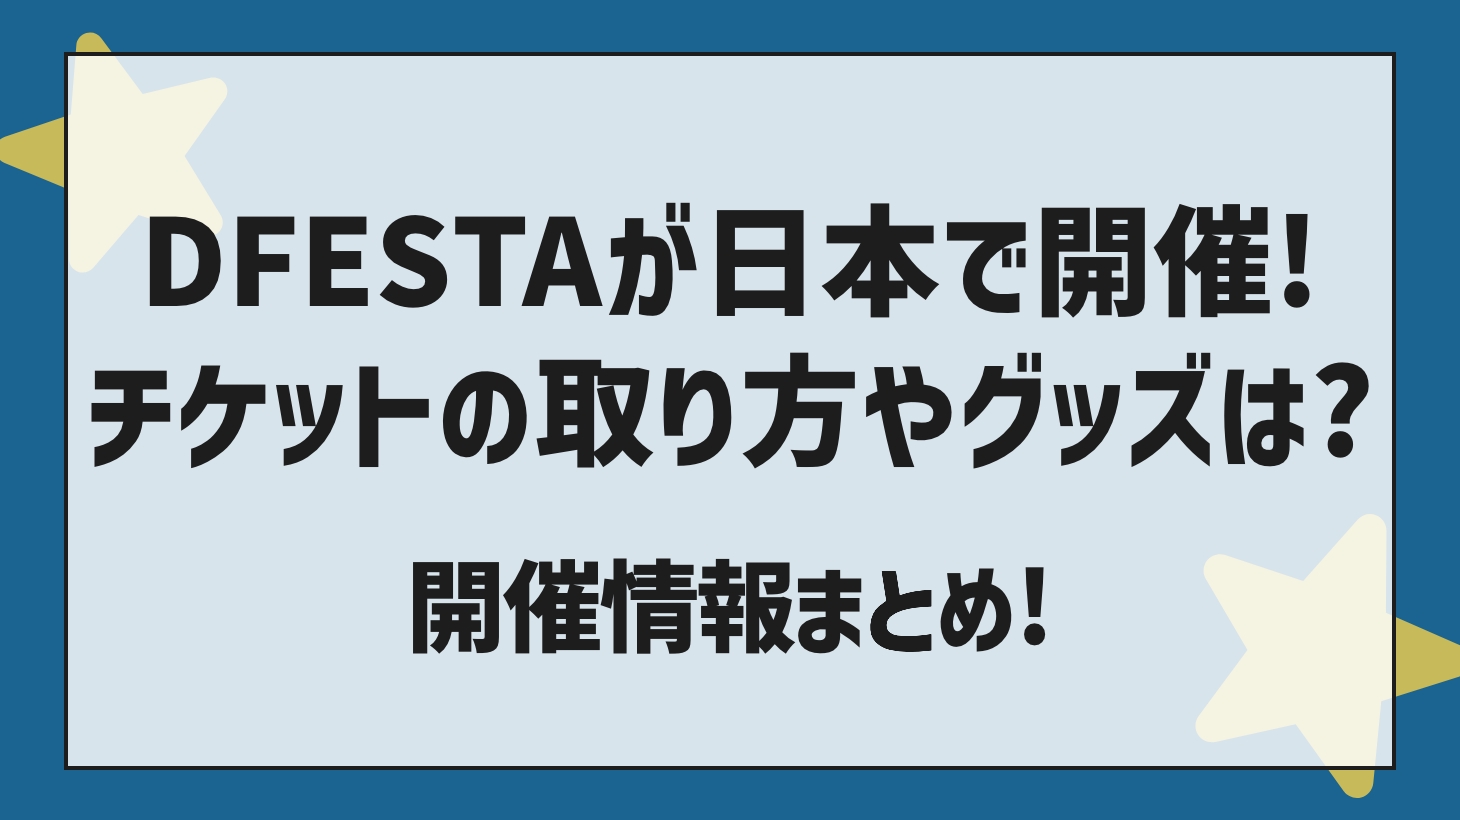 How to get a D'FESTA Japan ticket? Event information summary!